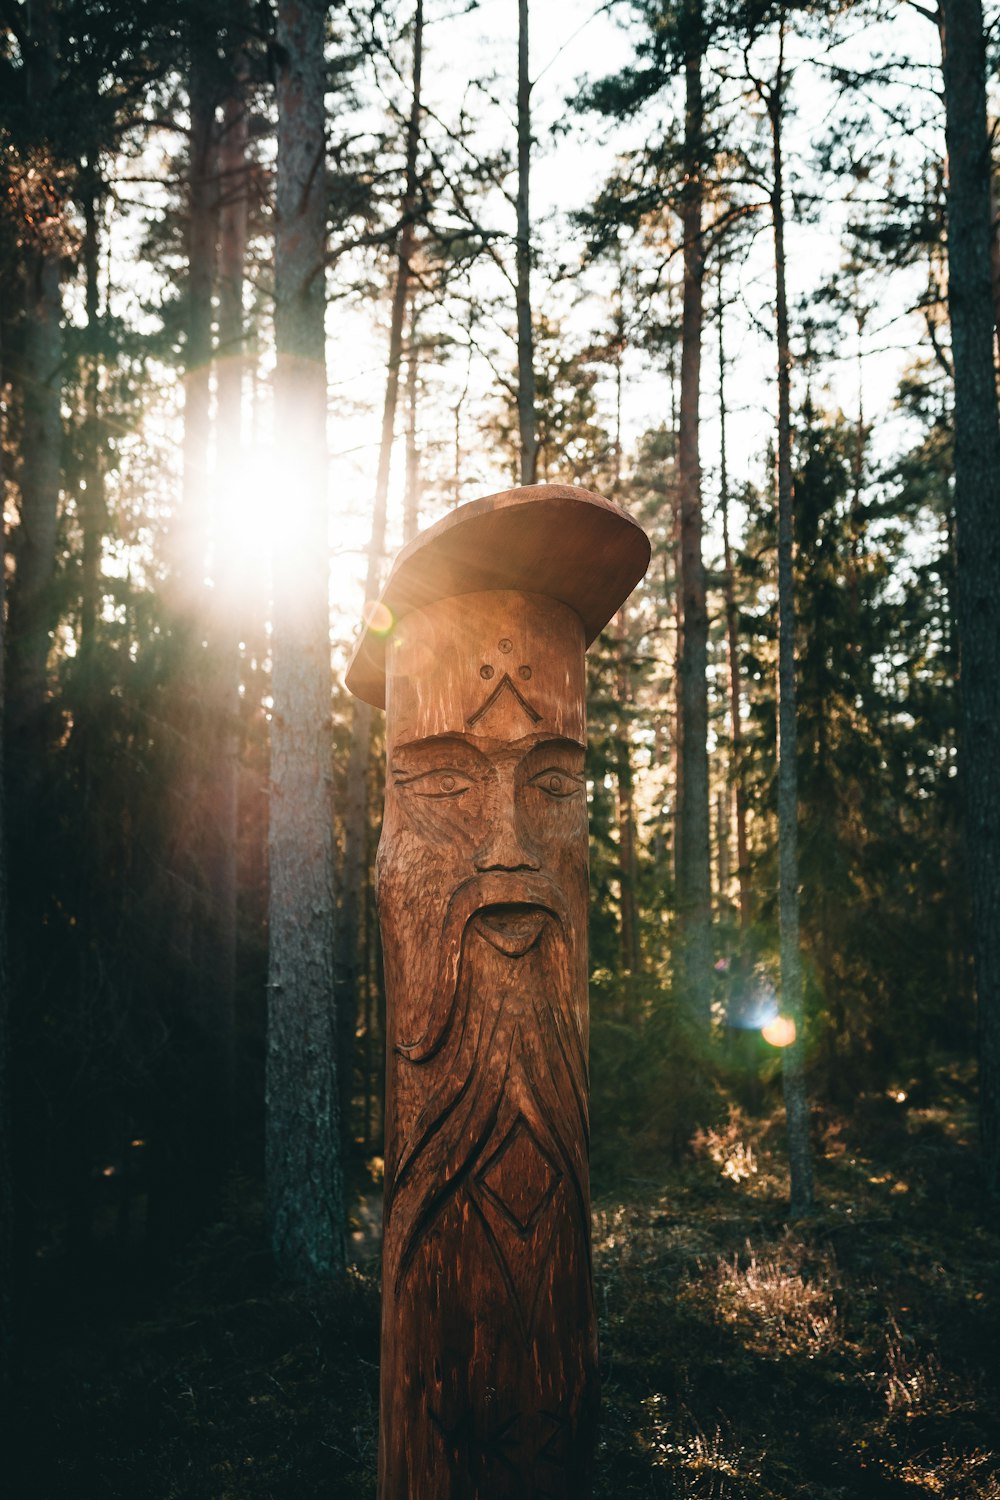 brown wooden statue in forest during daytime